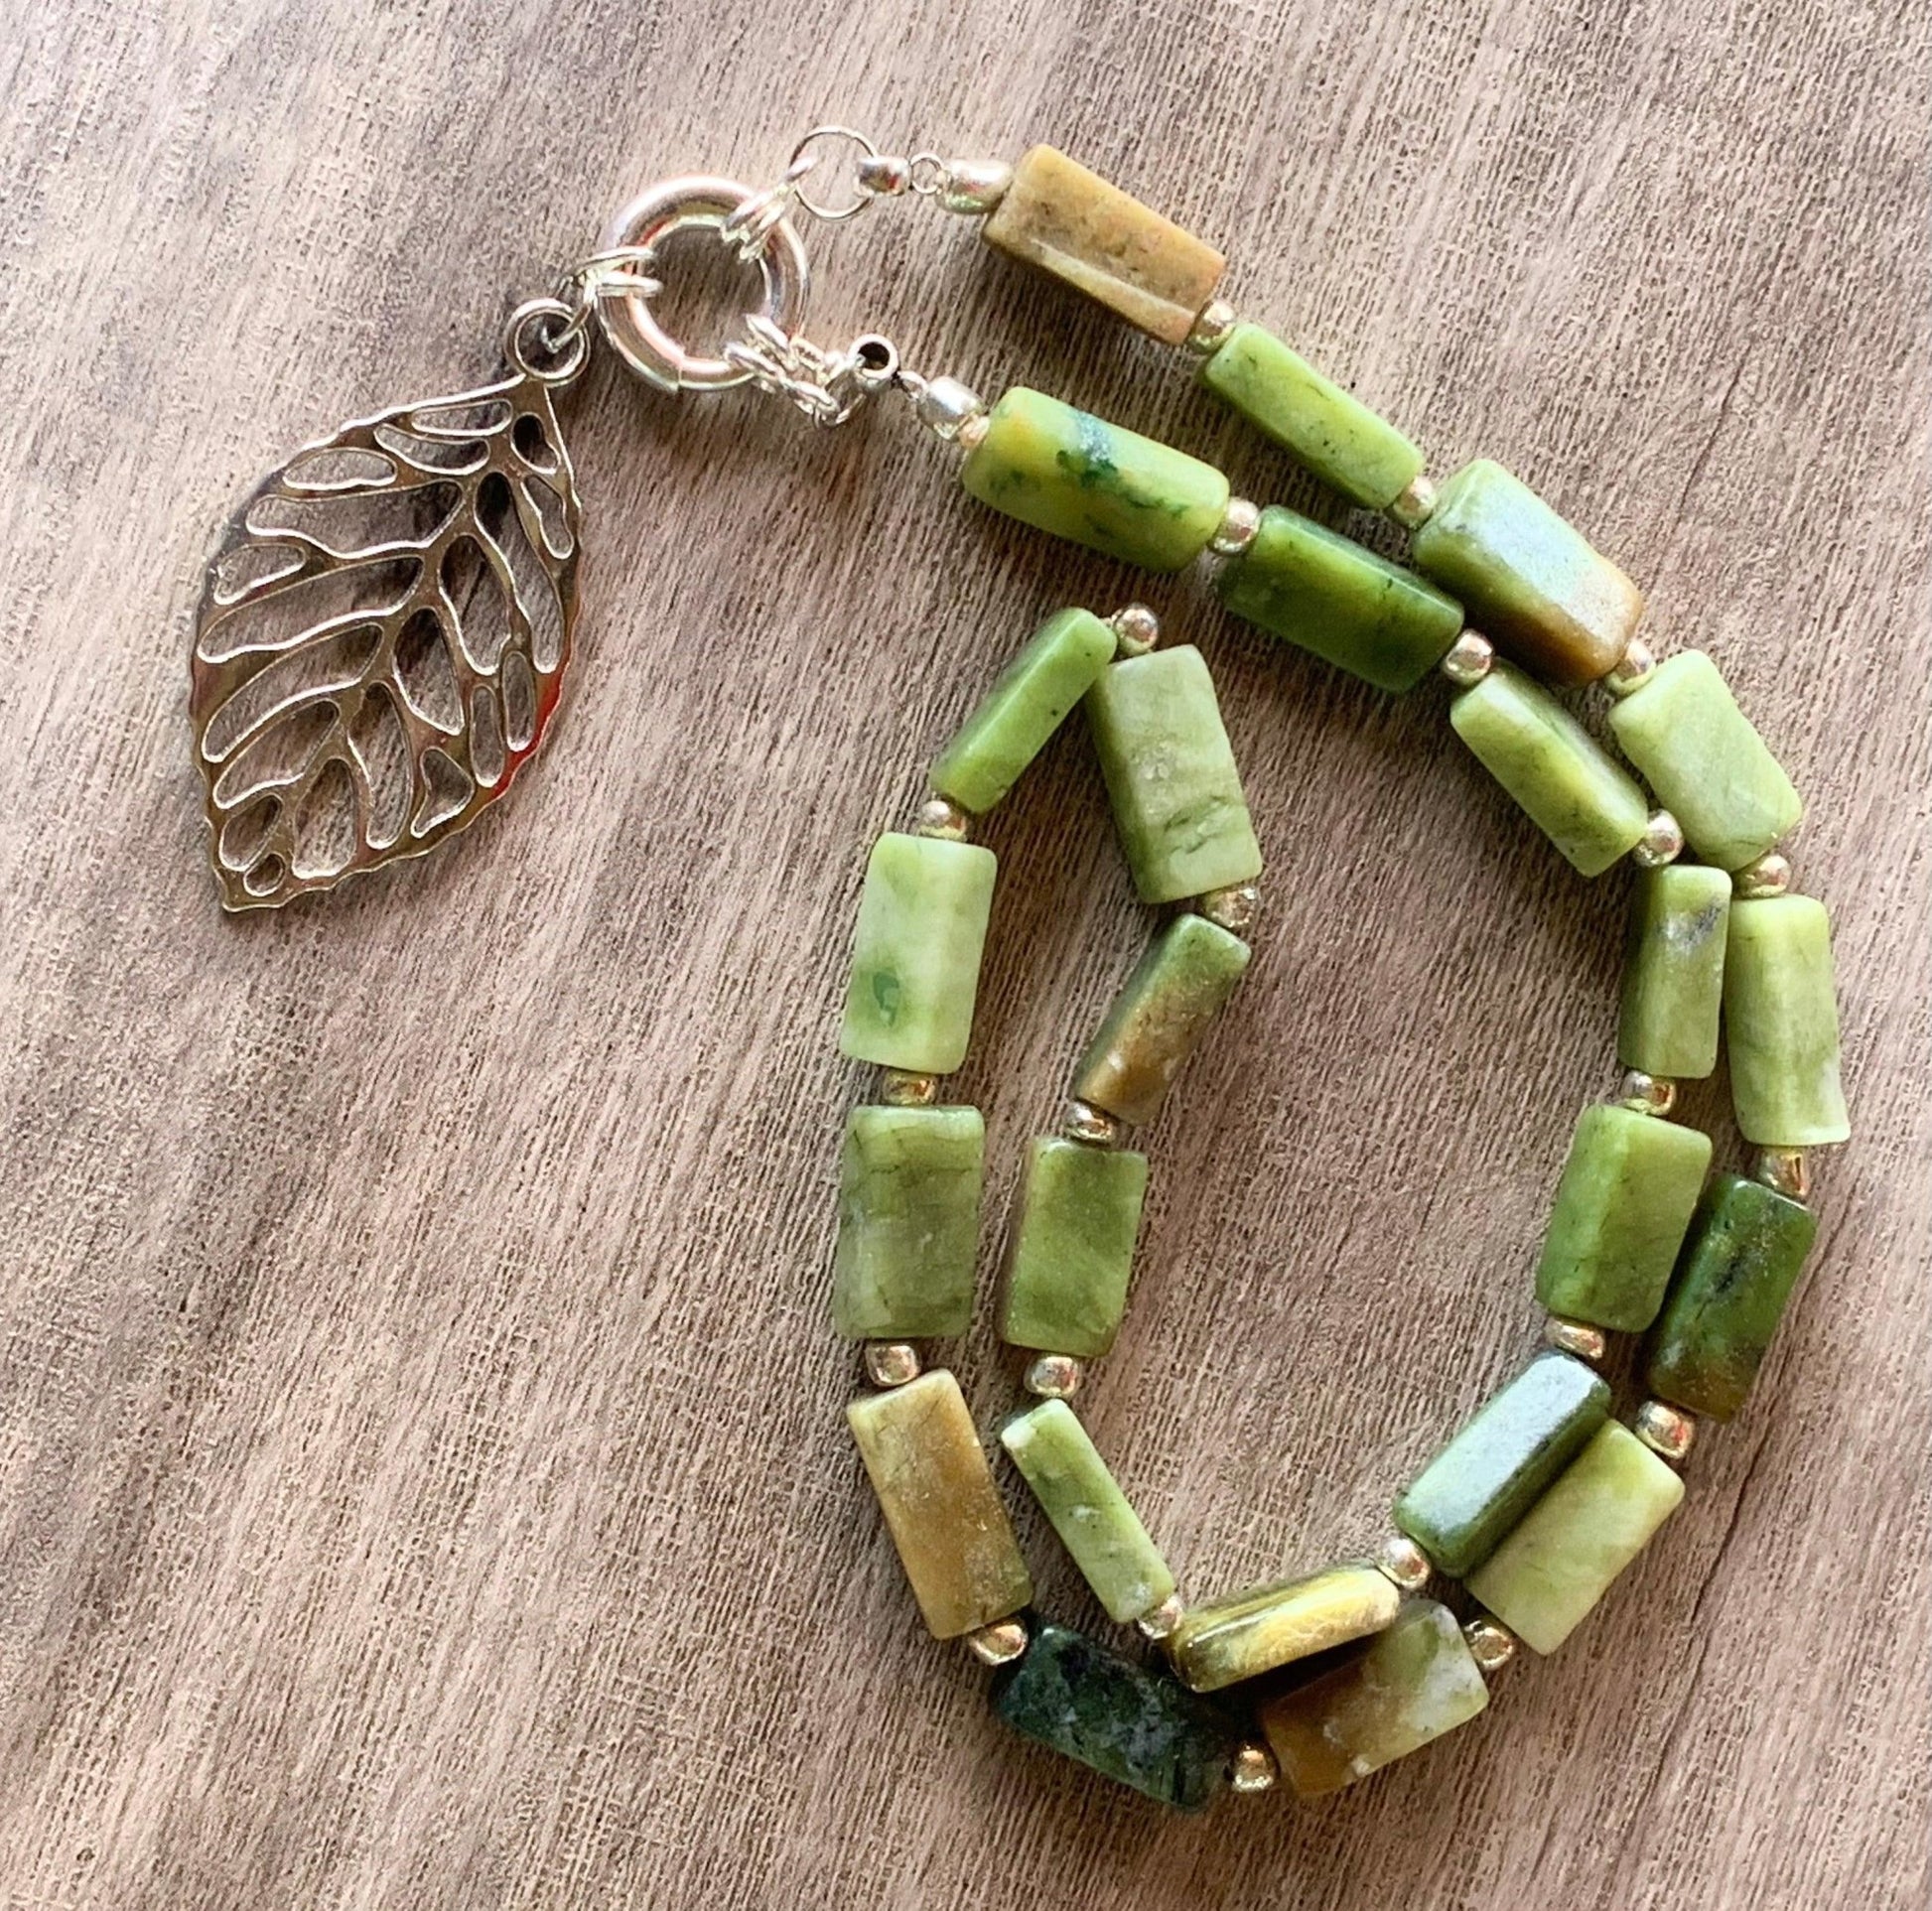 Harmony Hand Made New Jade (Serpentine) Necklace with Silver Plated Leaf Pendant - Born Mystics